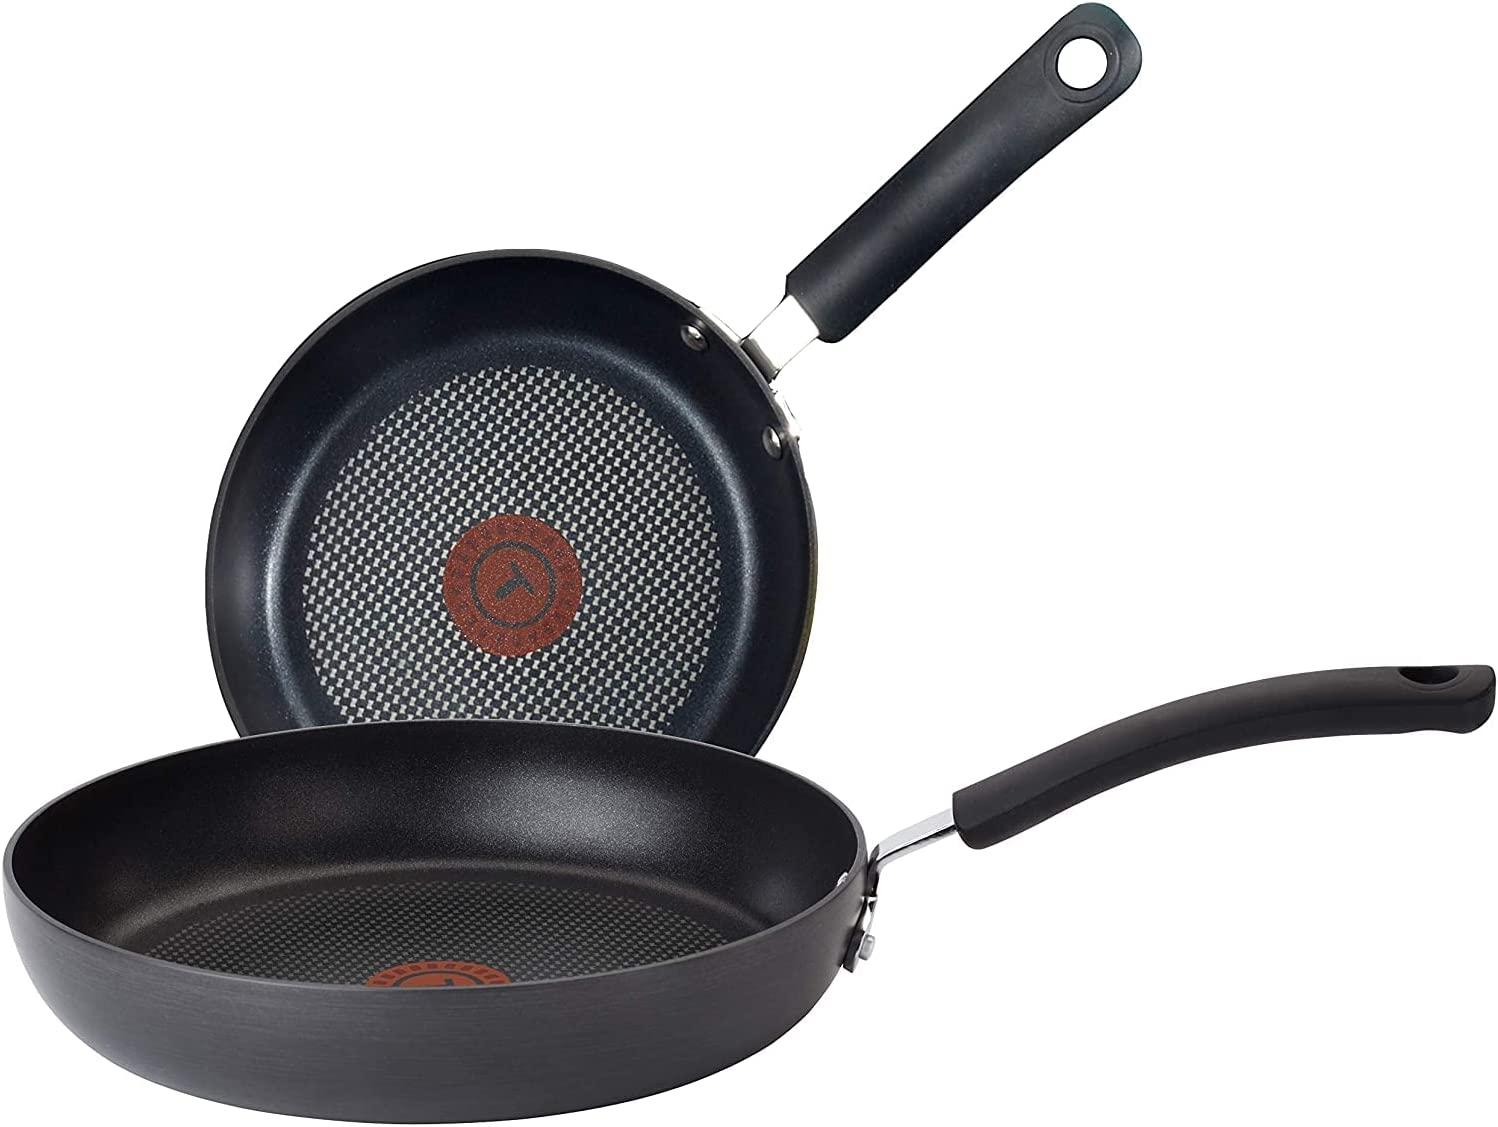 T-fal Ultimate Hard Anodized Nonstick Fry Pan Set for $29.99 Shipped